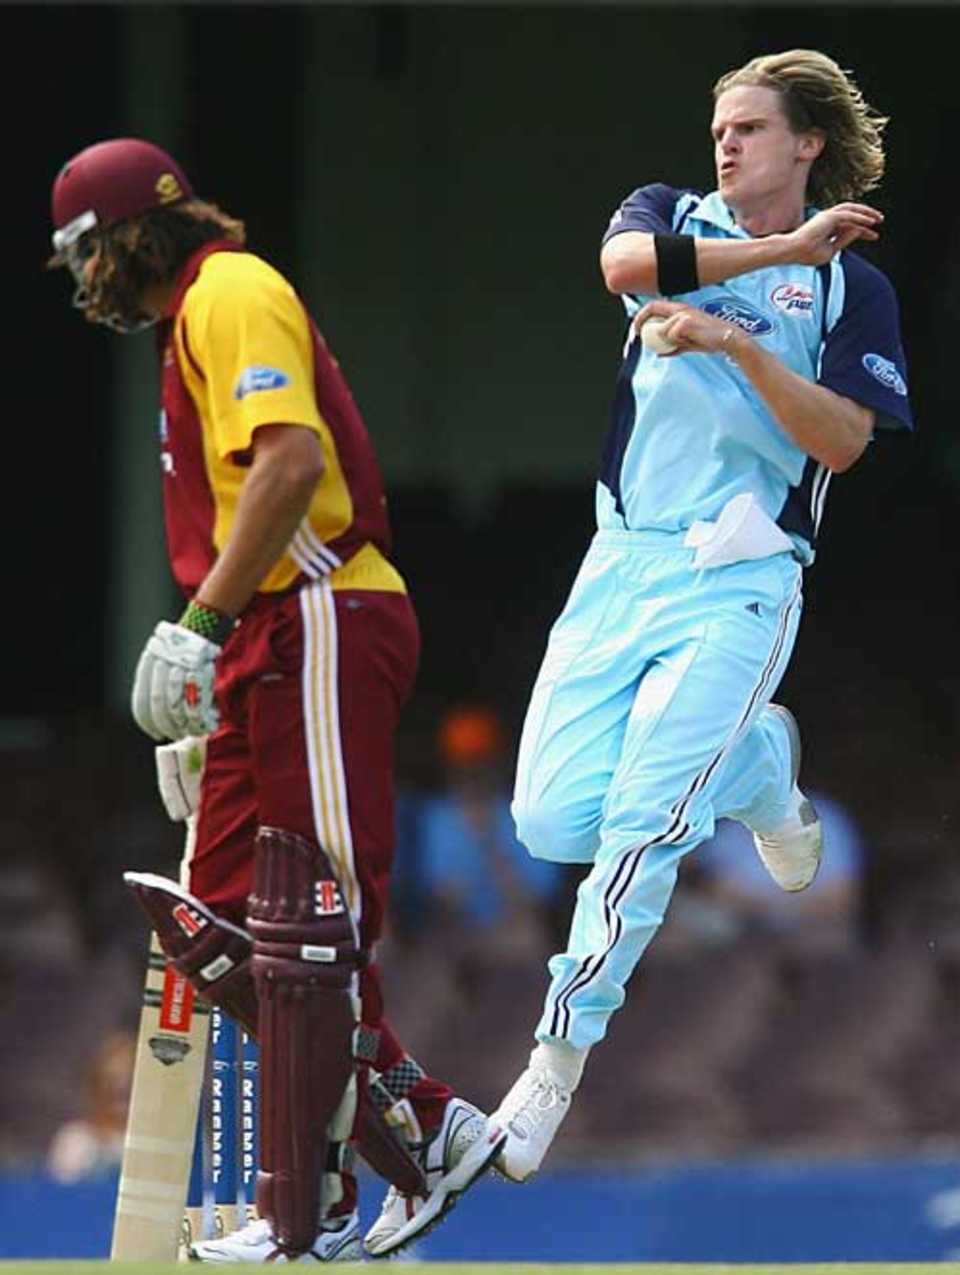 Nathan Bracken produced the miserly figures of 1 for 12 off his 10 overs, New South Wales v Queensland, FR Cup, Sydney, December 6, 2006